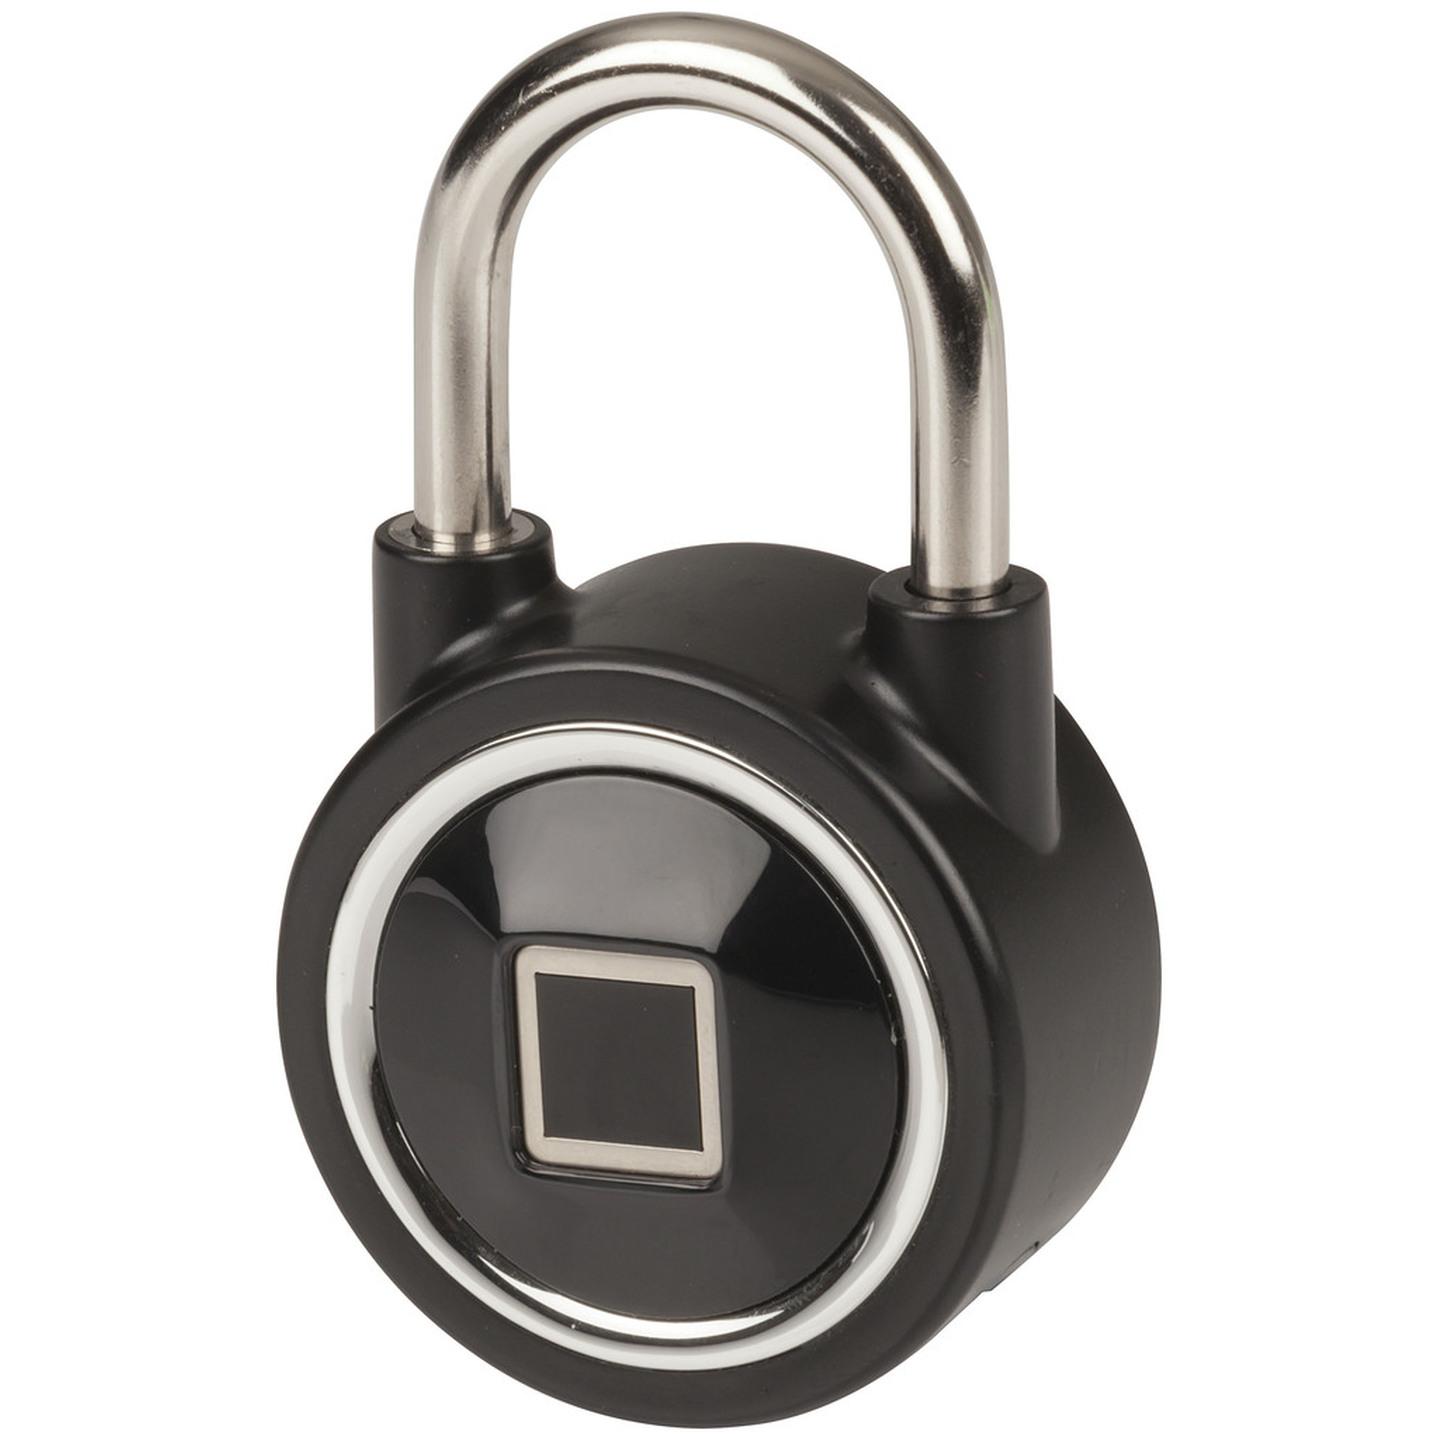 Bluetooth Controlled Padlock with Fingerprint Scanner